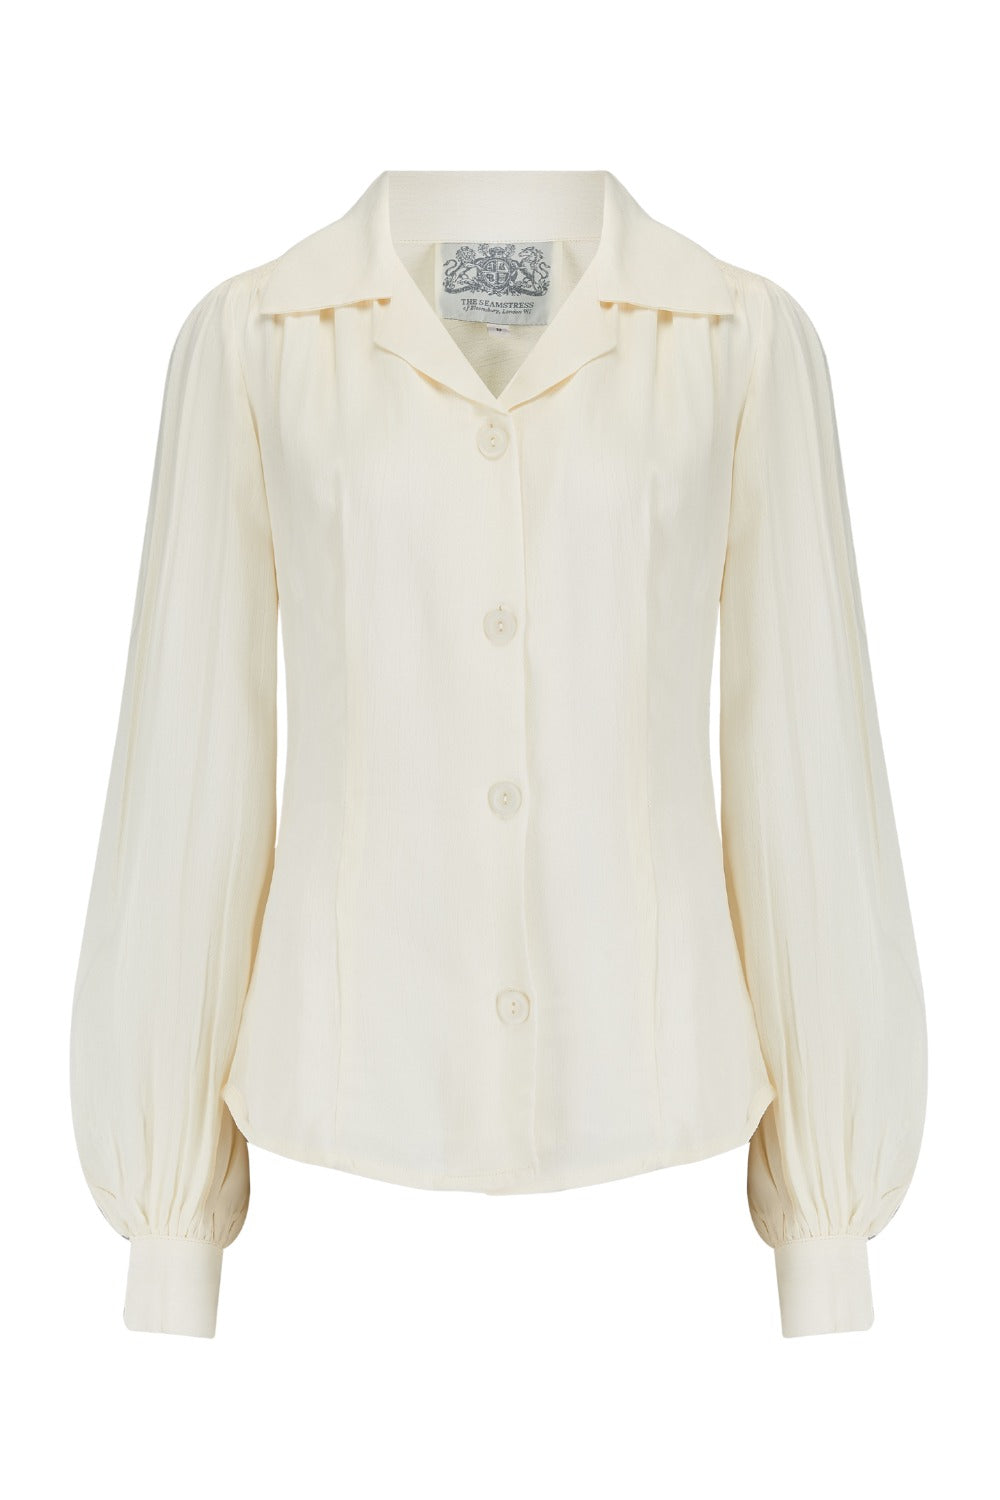 Poppy Long Sleeve Blouse in Cream, Authentic & Classic 1940s Vintage S ...